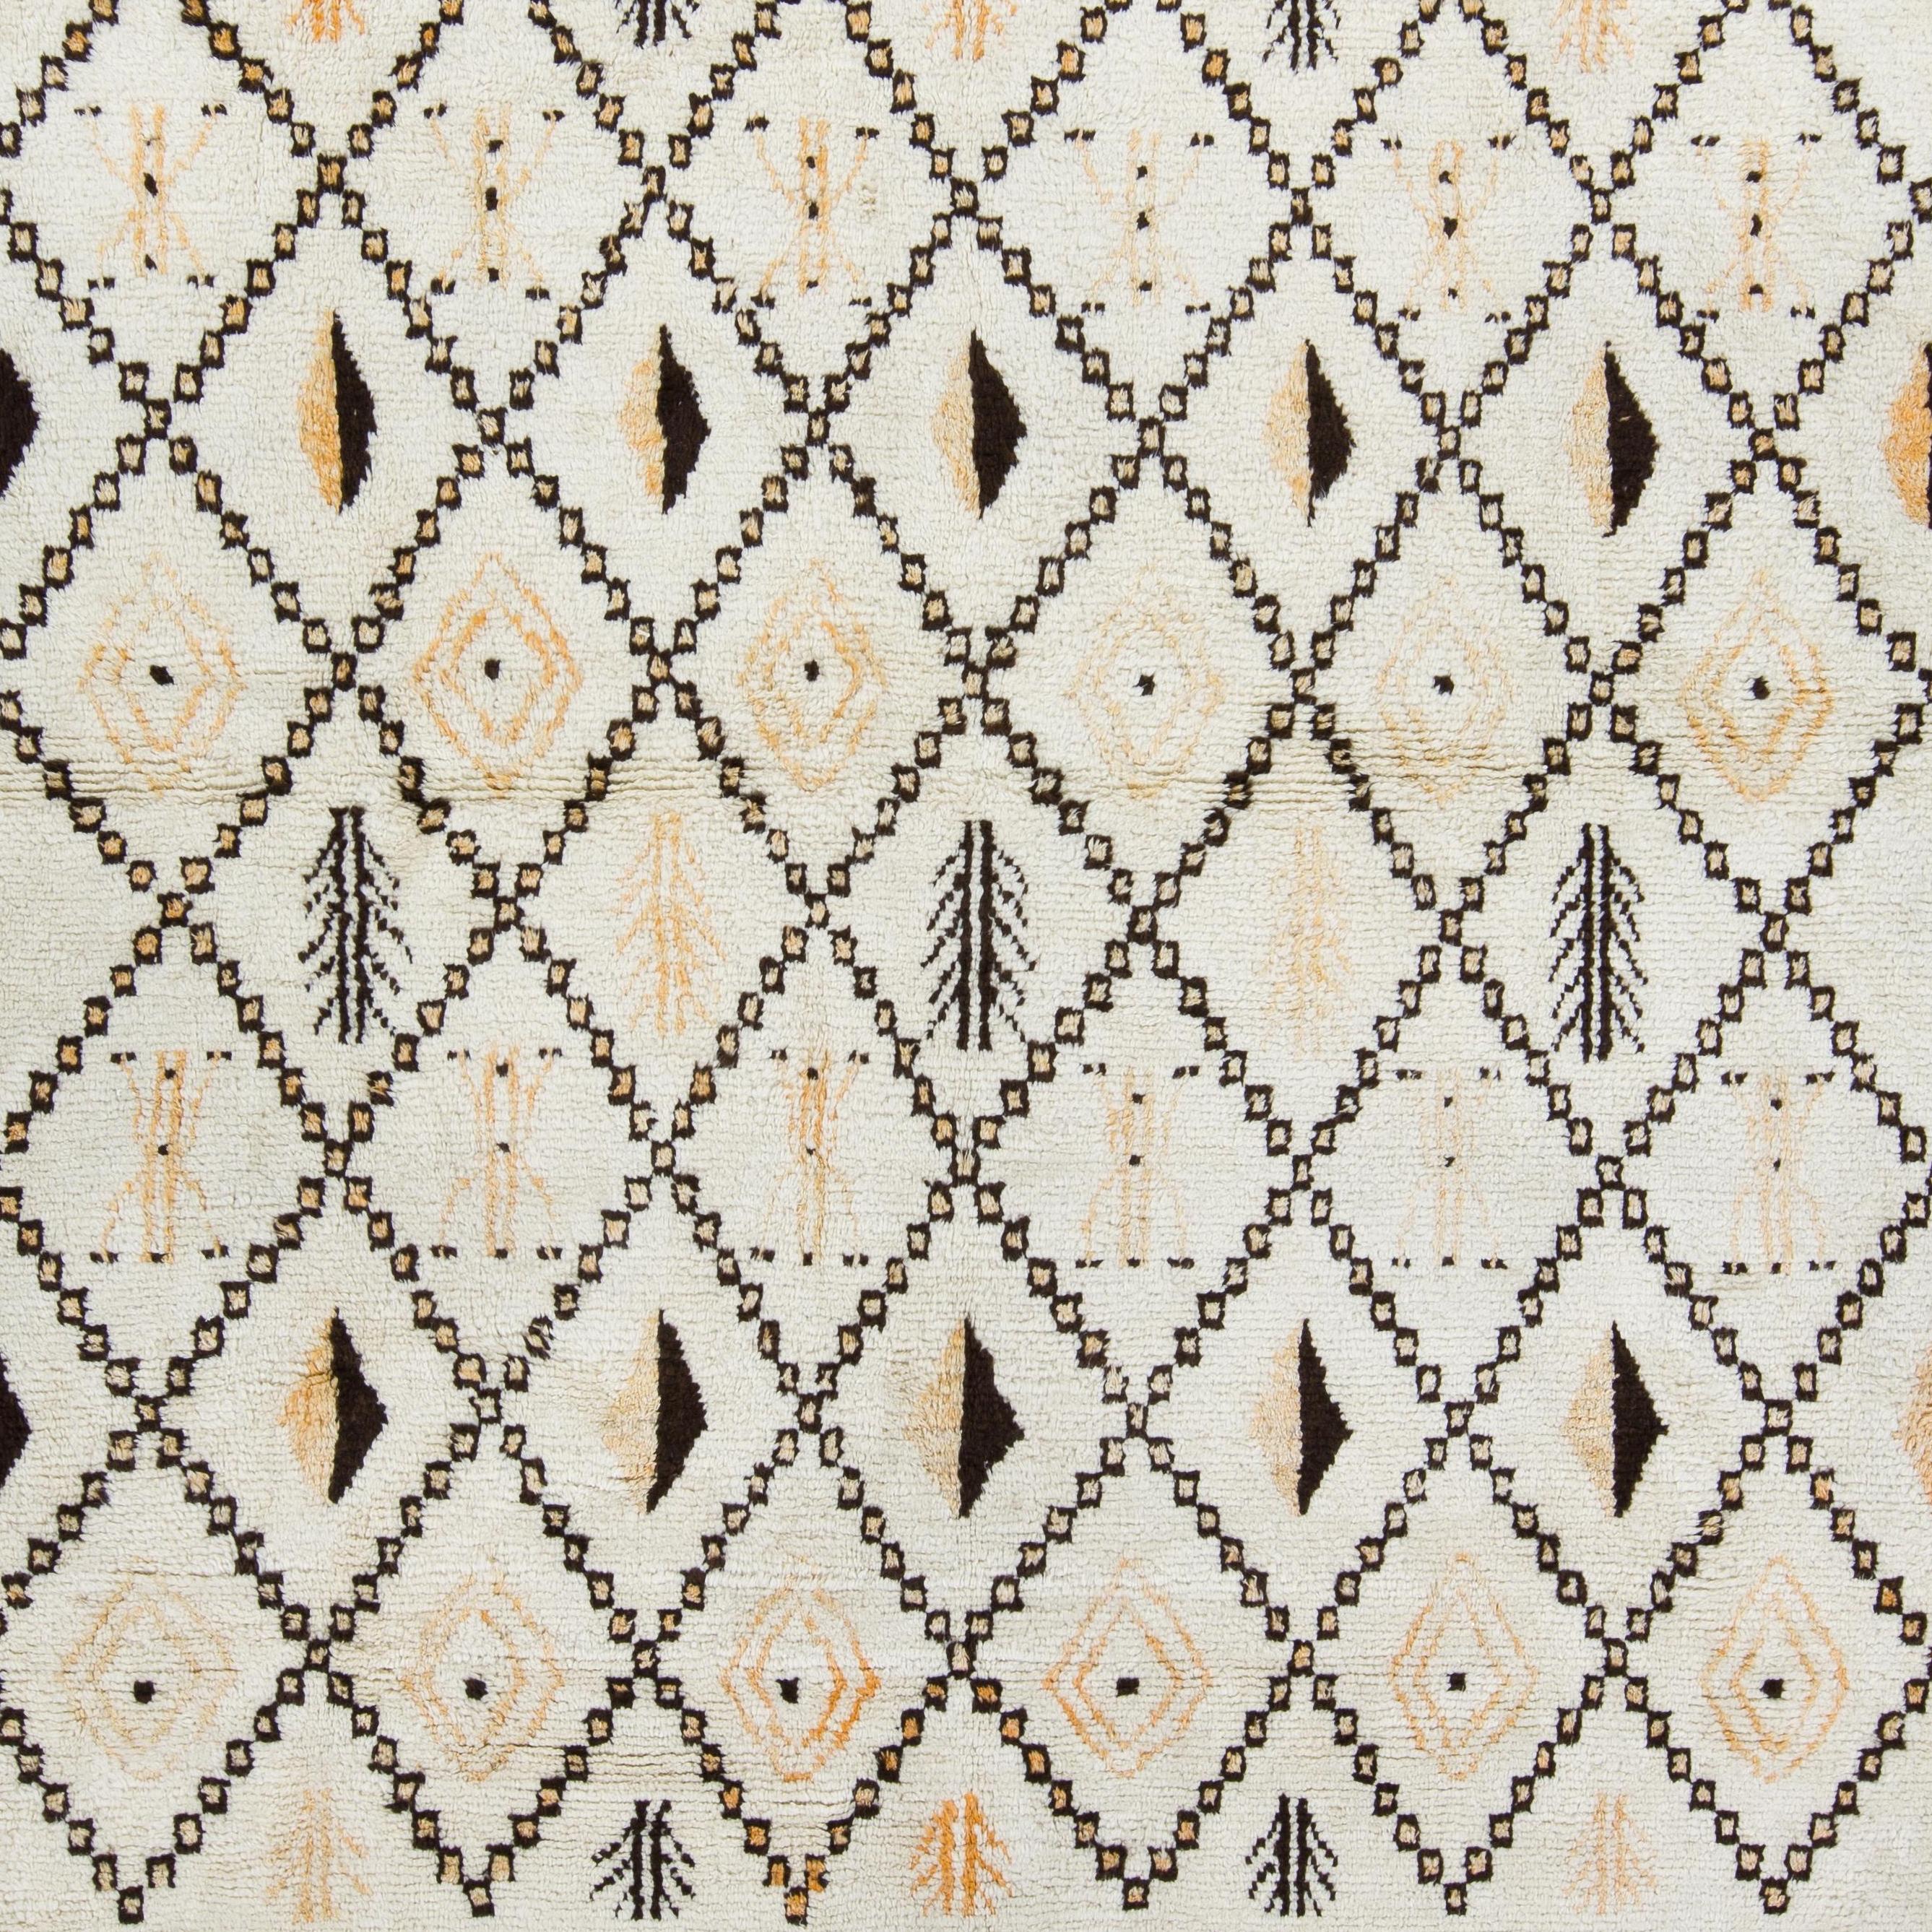 100% Natural Hand-Spun Wool of finest quality.

Available as seen or can be CUSTOM PRODUCED in any Design, Size, Color Combination and Pile Thickness requested. 

These beautiful hand-knotted rugs are produced from scratch in our atelier located in